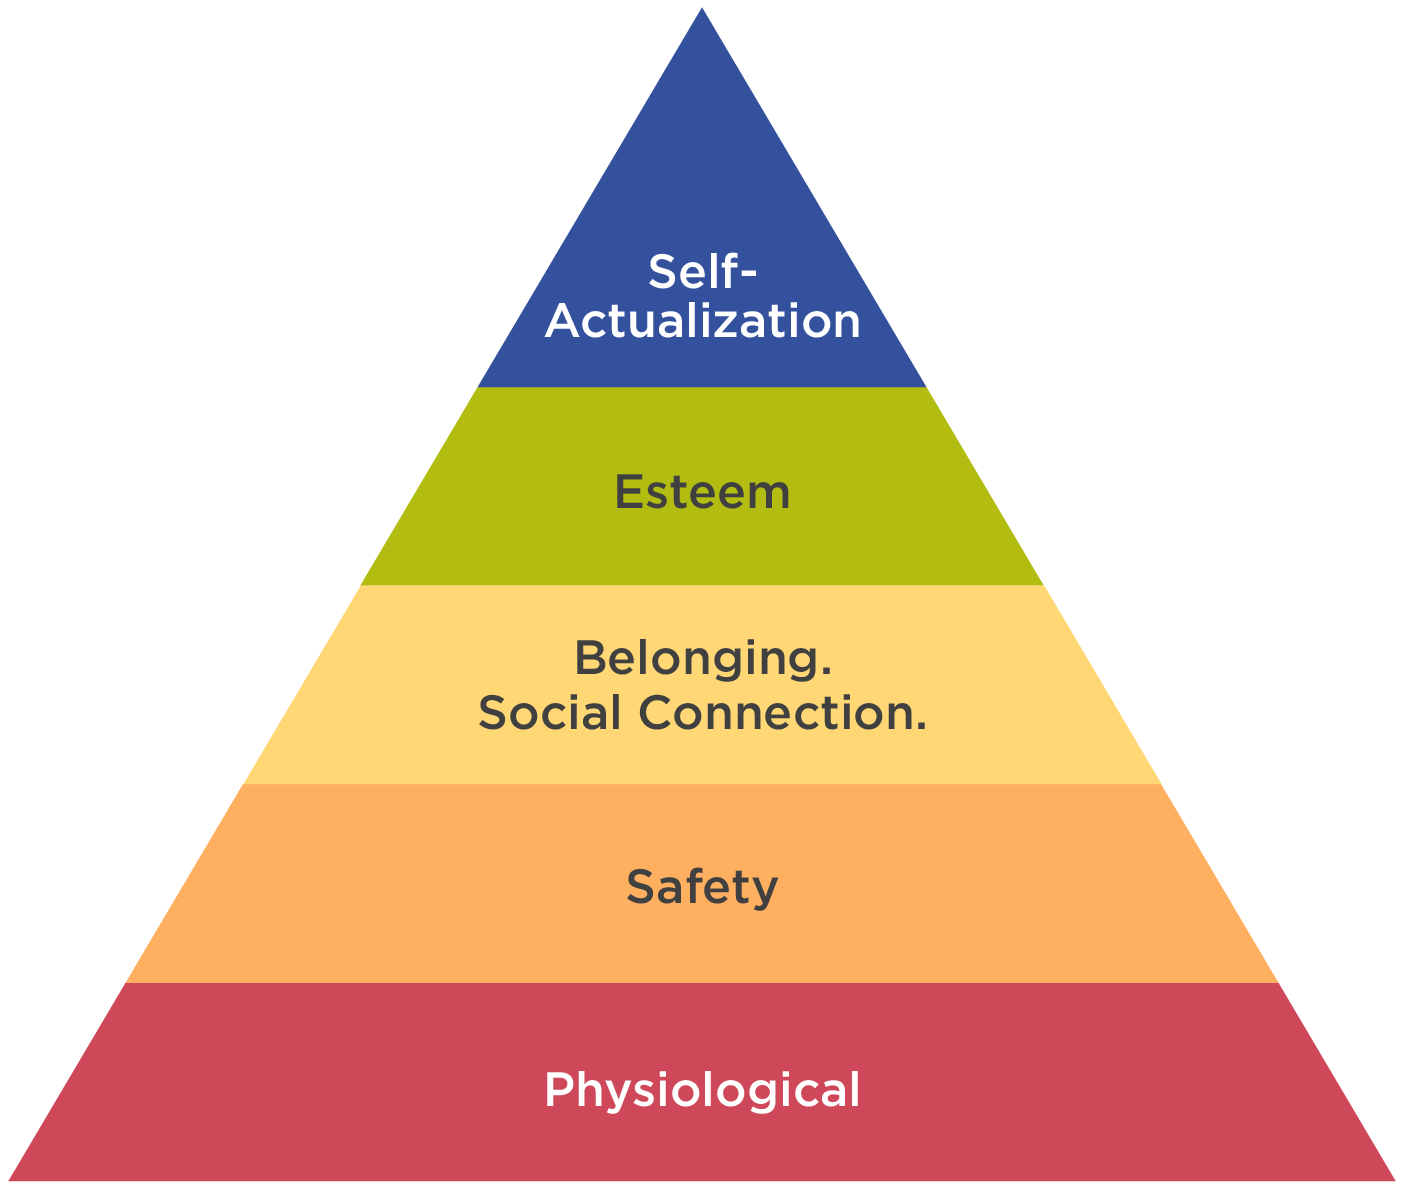 A Business Application of Maslow's Hierarchy of Needs